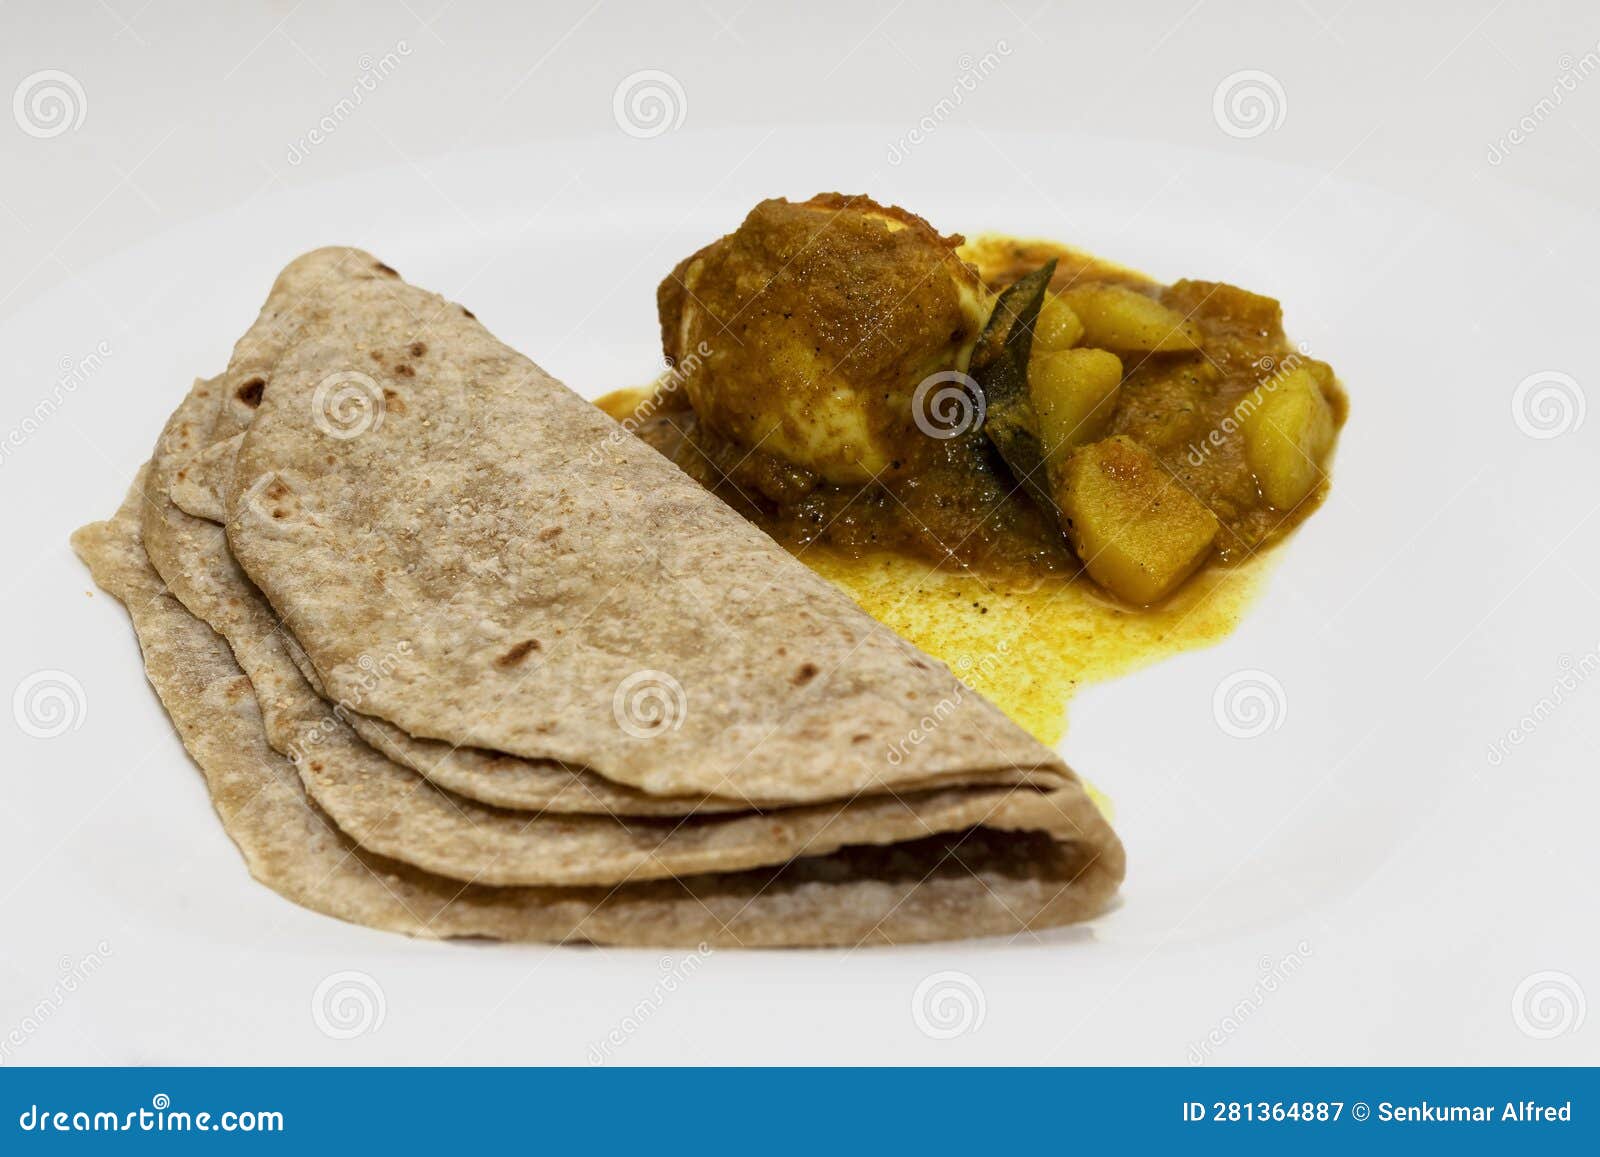 Premium Photo | Indian chapati or fulka or gehu roti with wheat grains in  background. it's a healthy fibre rich traditional north or south indian  food, selective focus